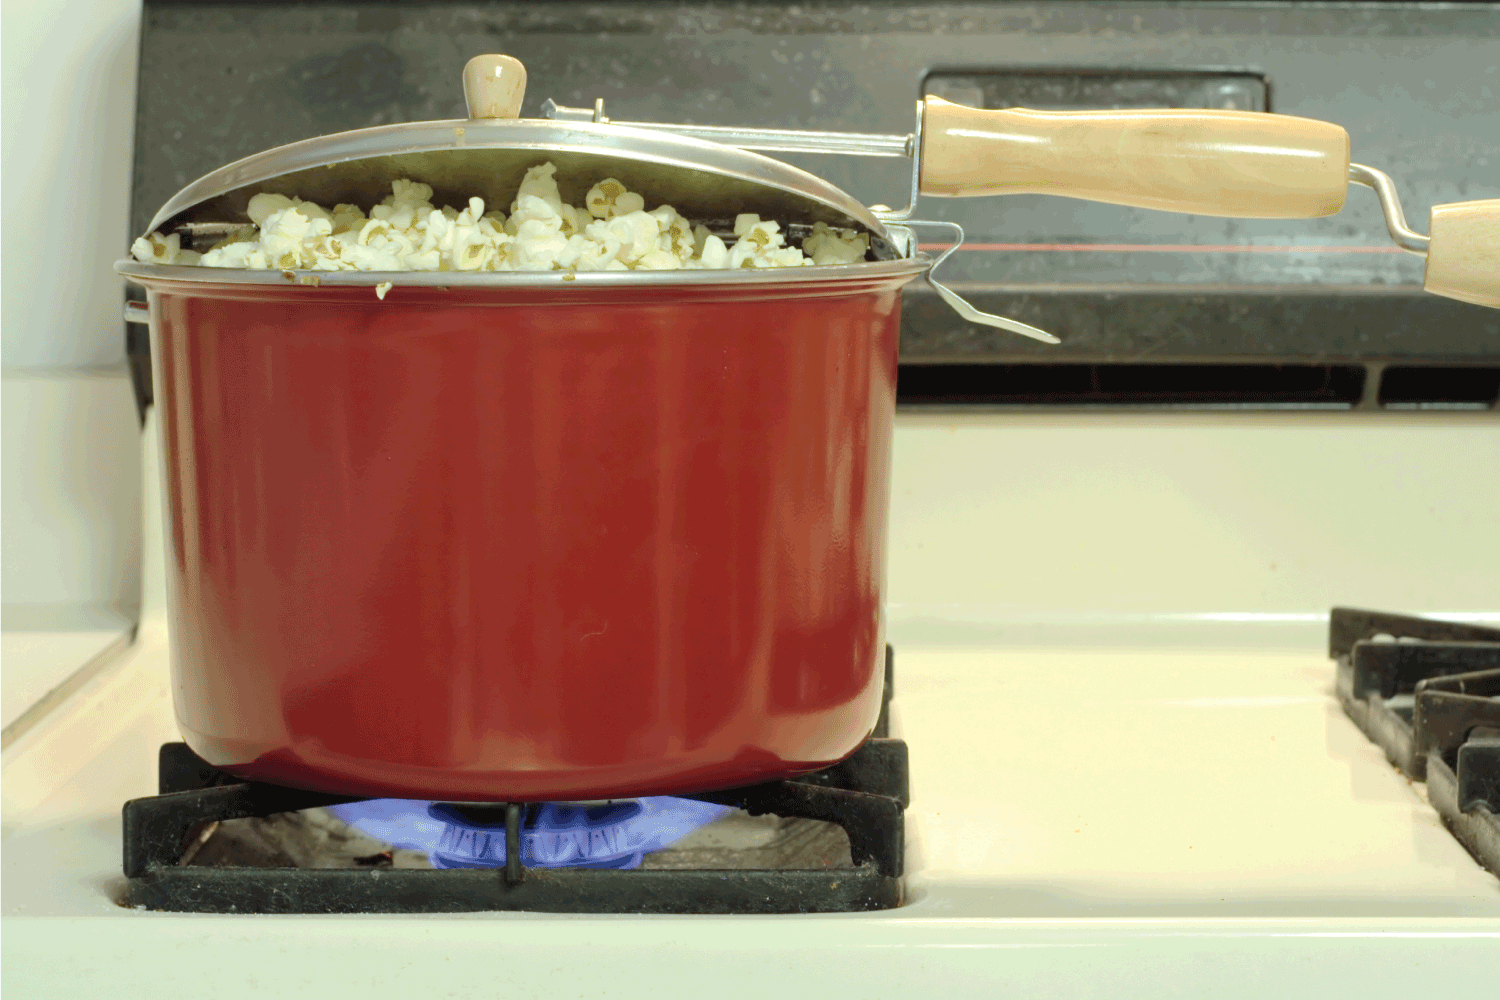 Popcorn on the stove cooking in a popcorn cooker